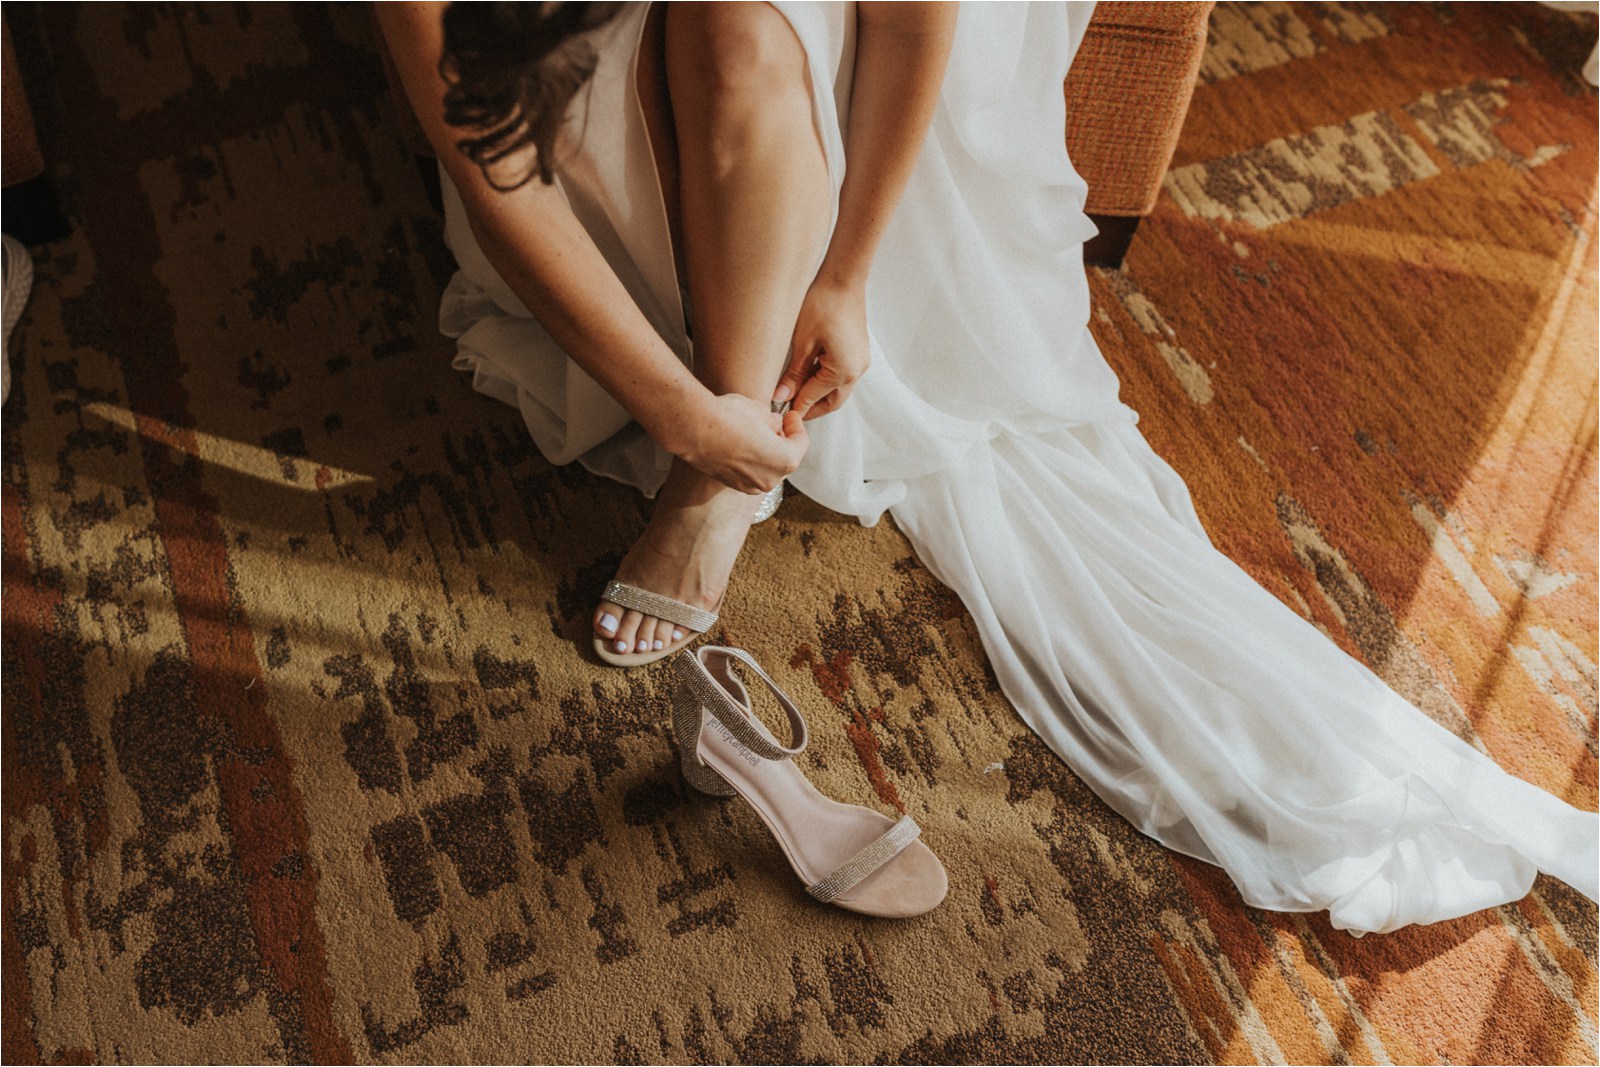 Erin, the bride, getting her shoes on and getting ready for her first look with her groom, Harry.